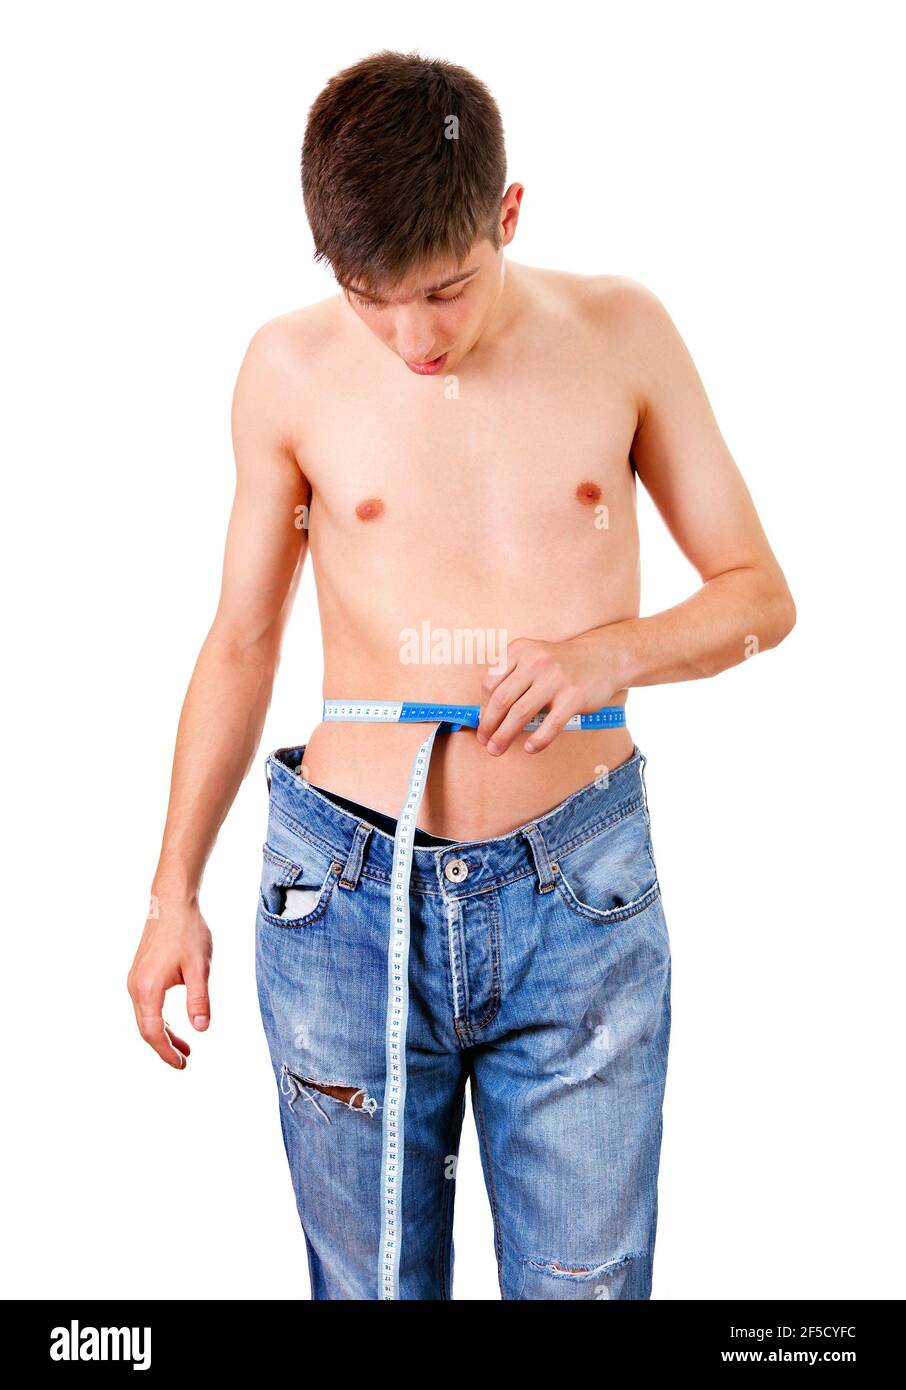 https://c8.alamy.com/comp/2F5CYFC/surprised-young-man-measure-his-waist-on-the-white-background-2F5CYFC.jpg